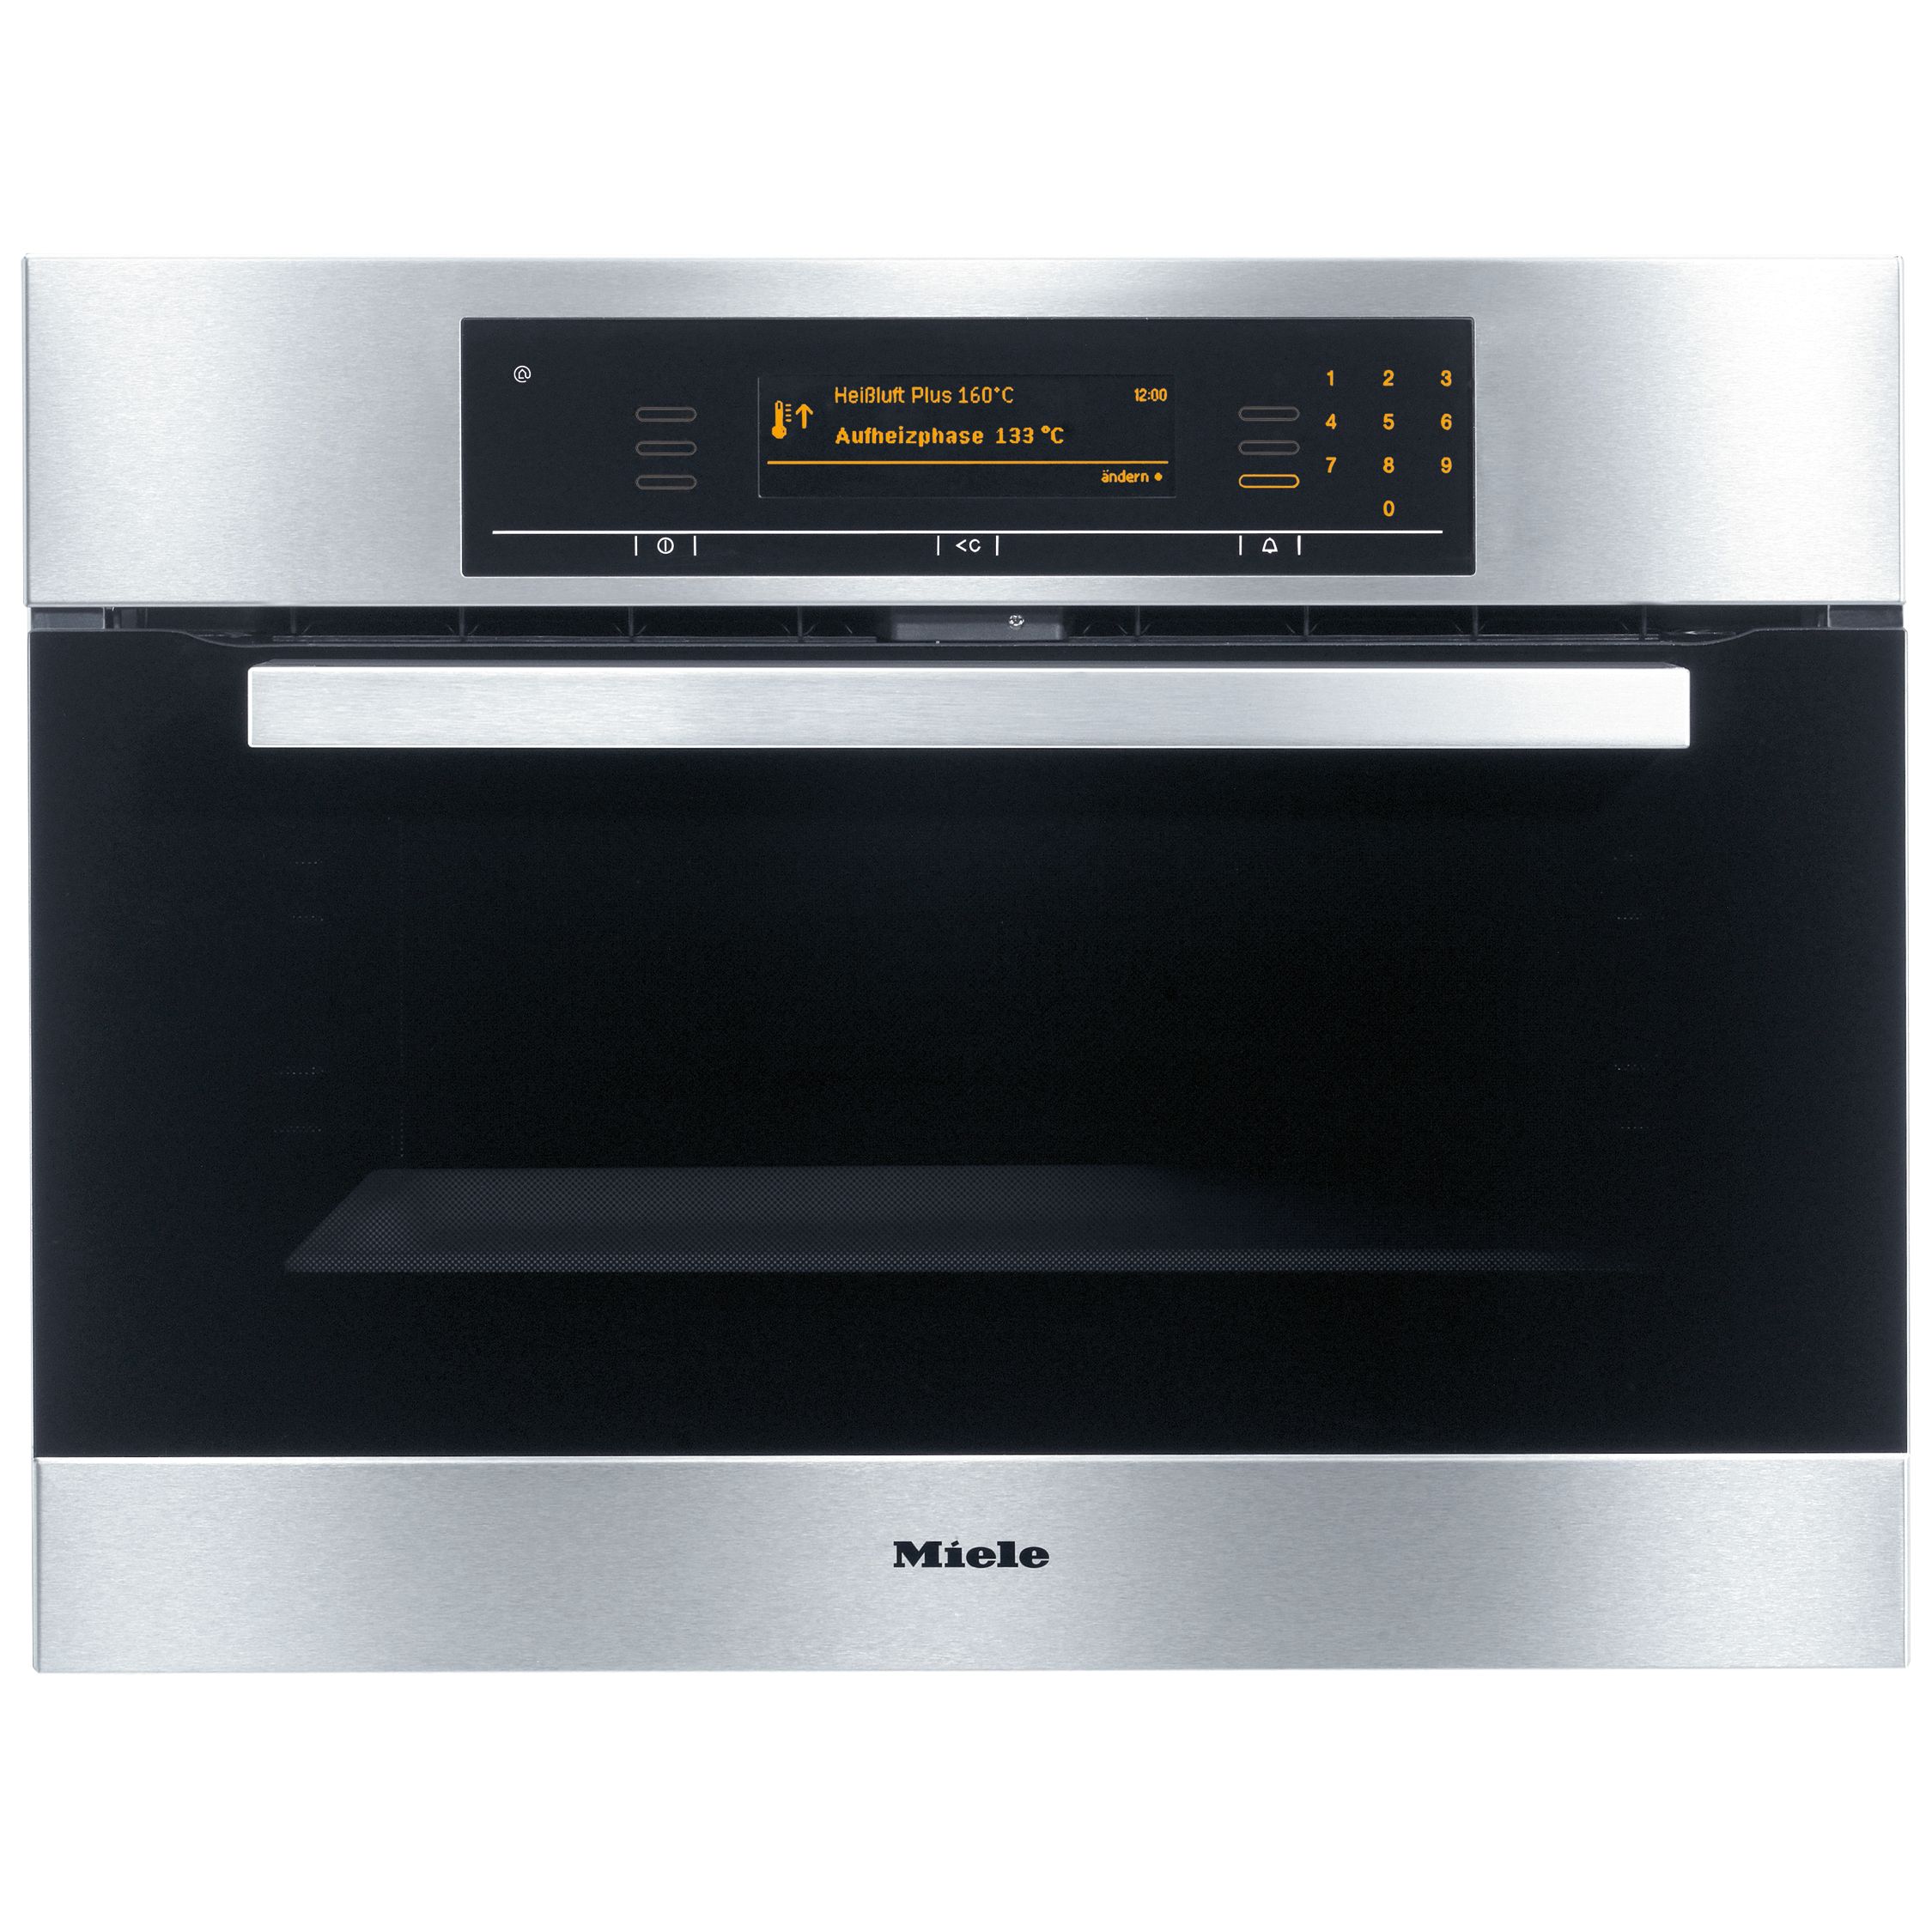 Miele H5081BP Built-in Compact Single Oven, Stainless Steel at John Lewis